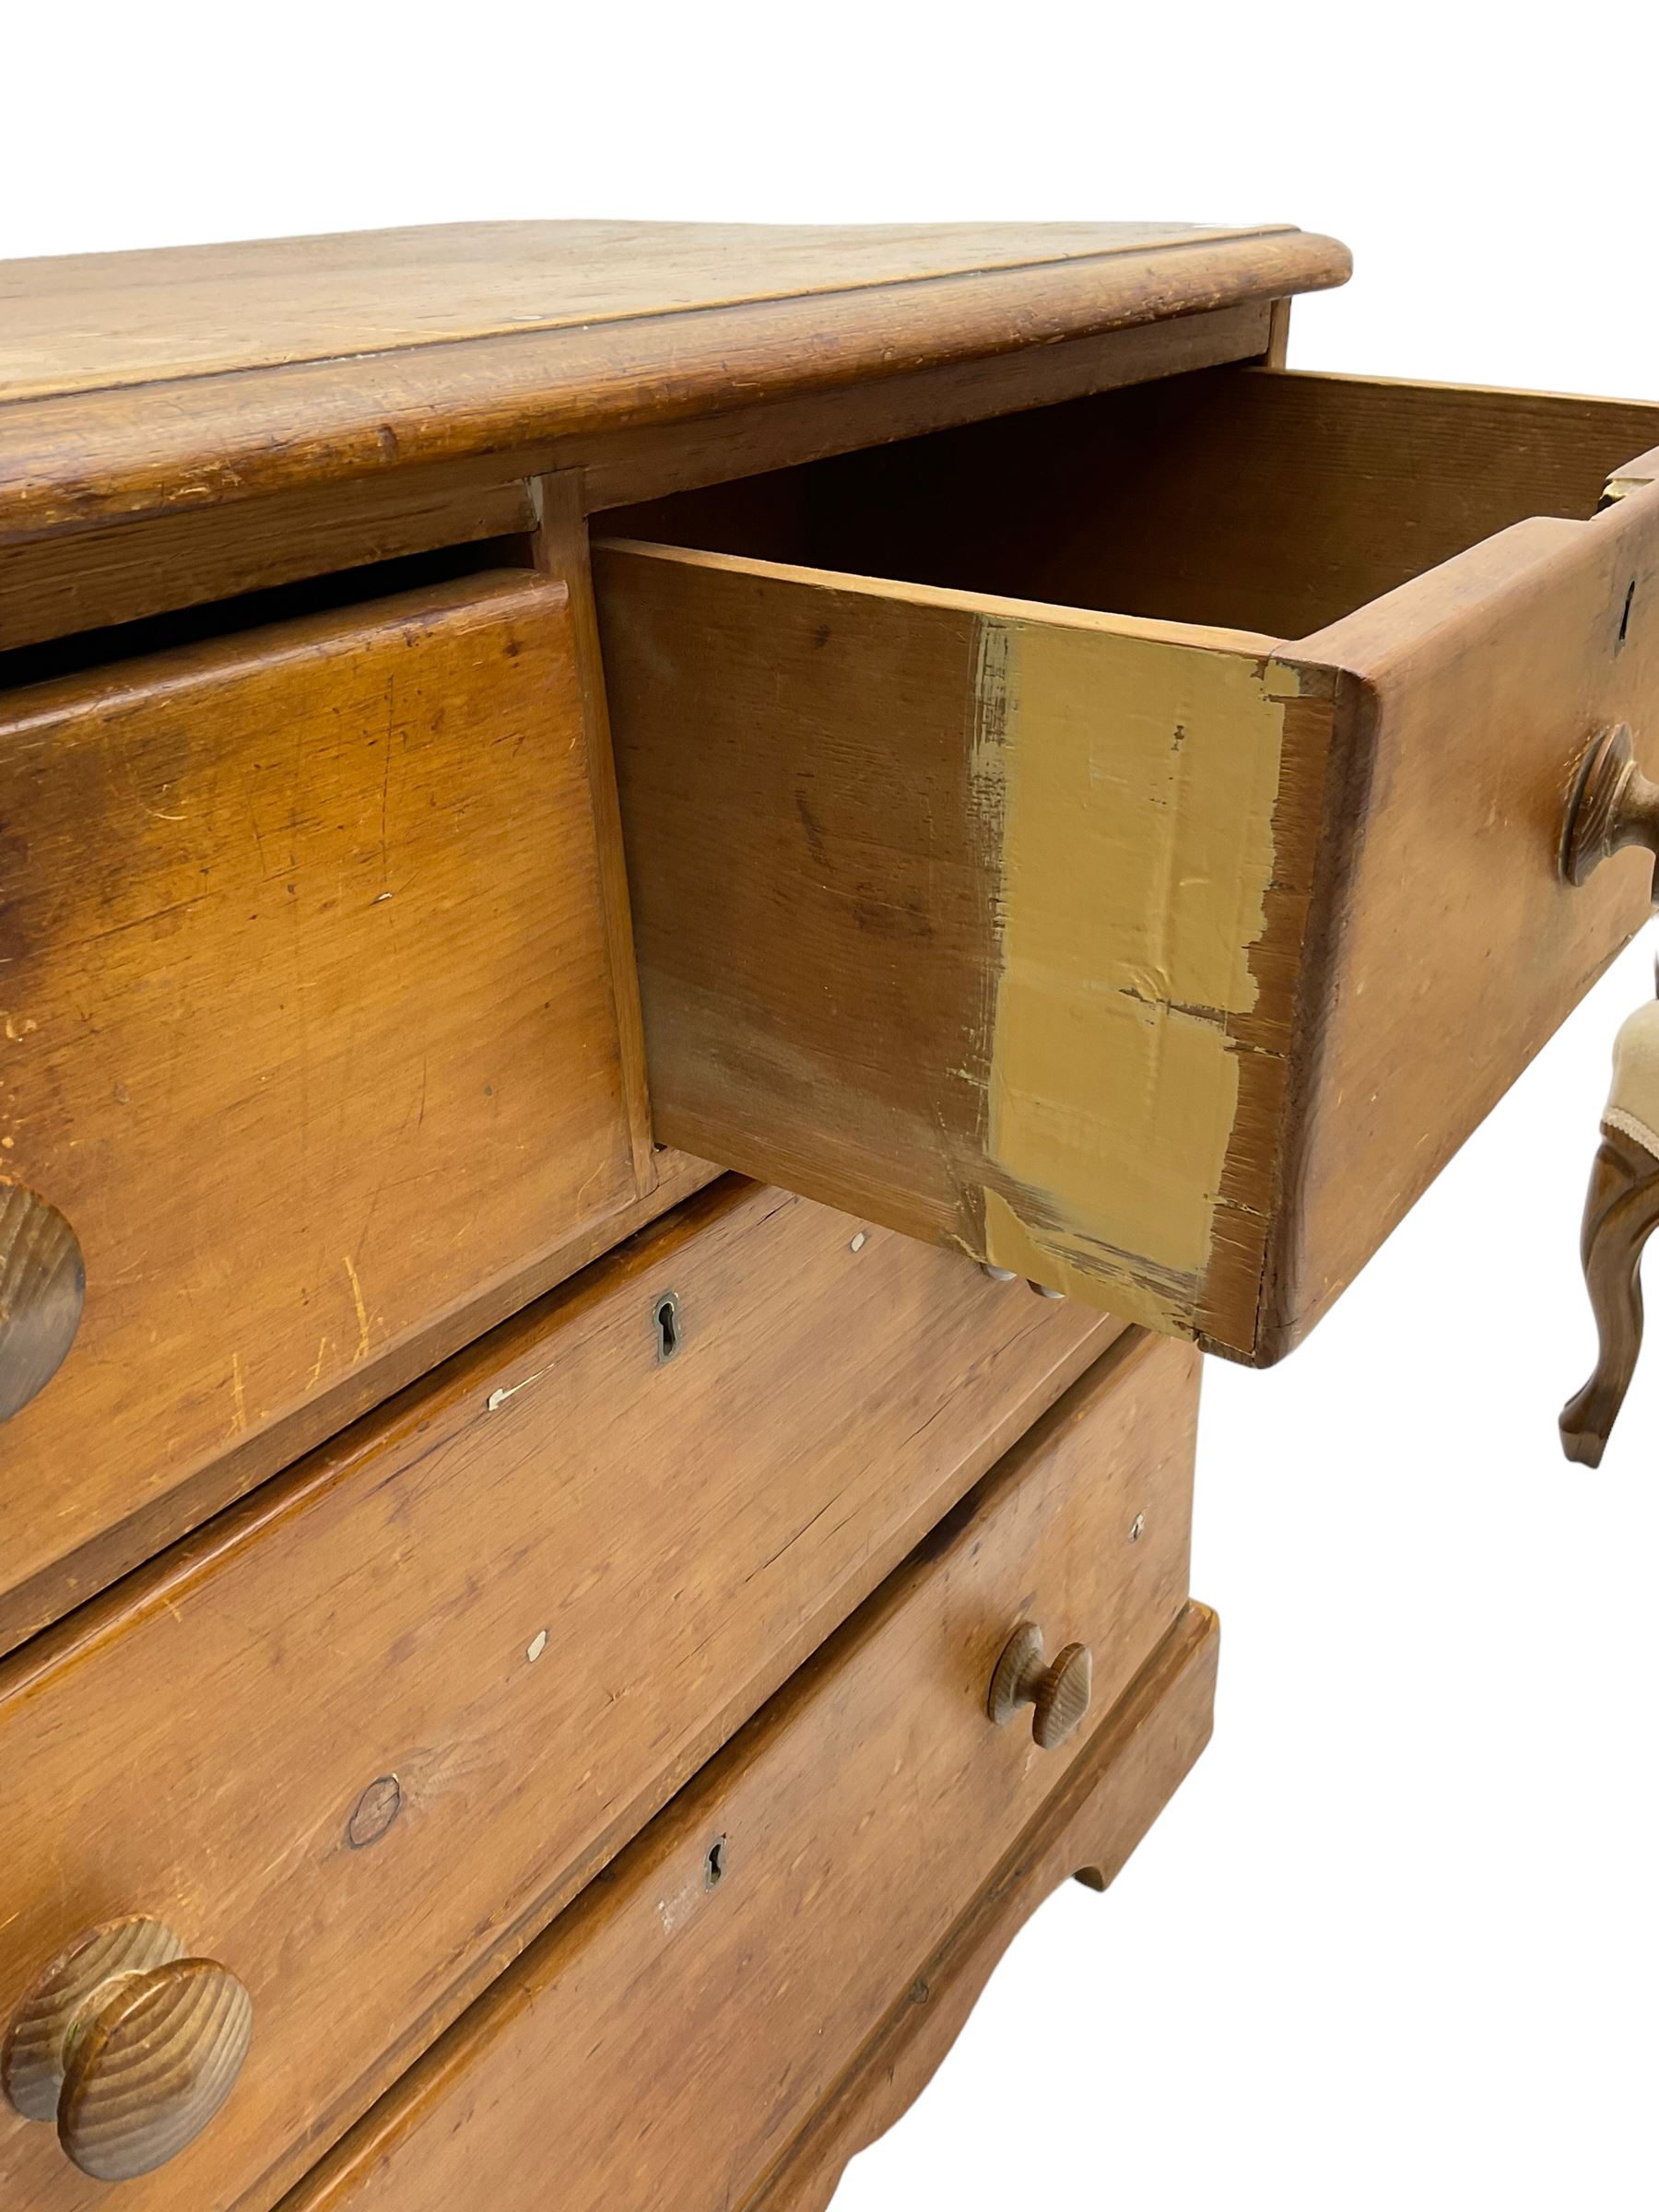 Late 19th century waxed pine chest - Image 6 of 8